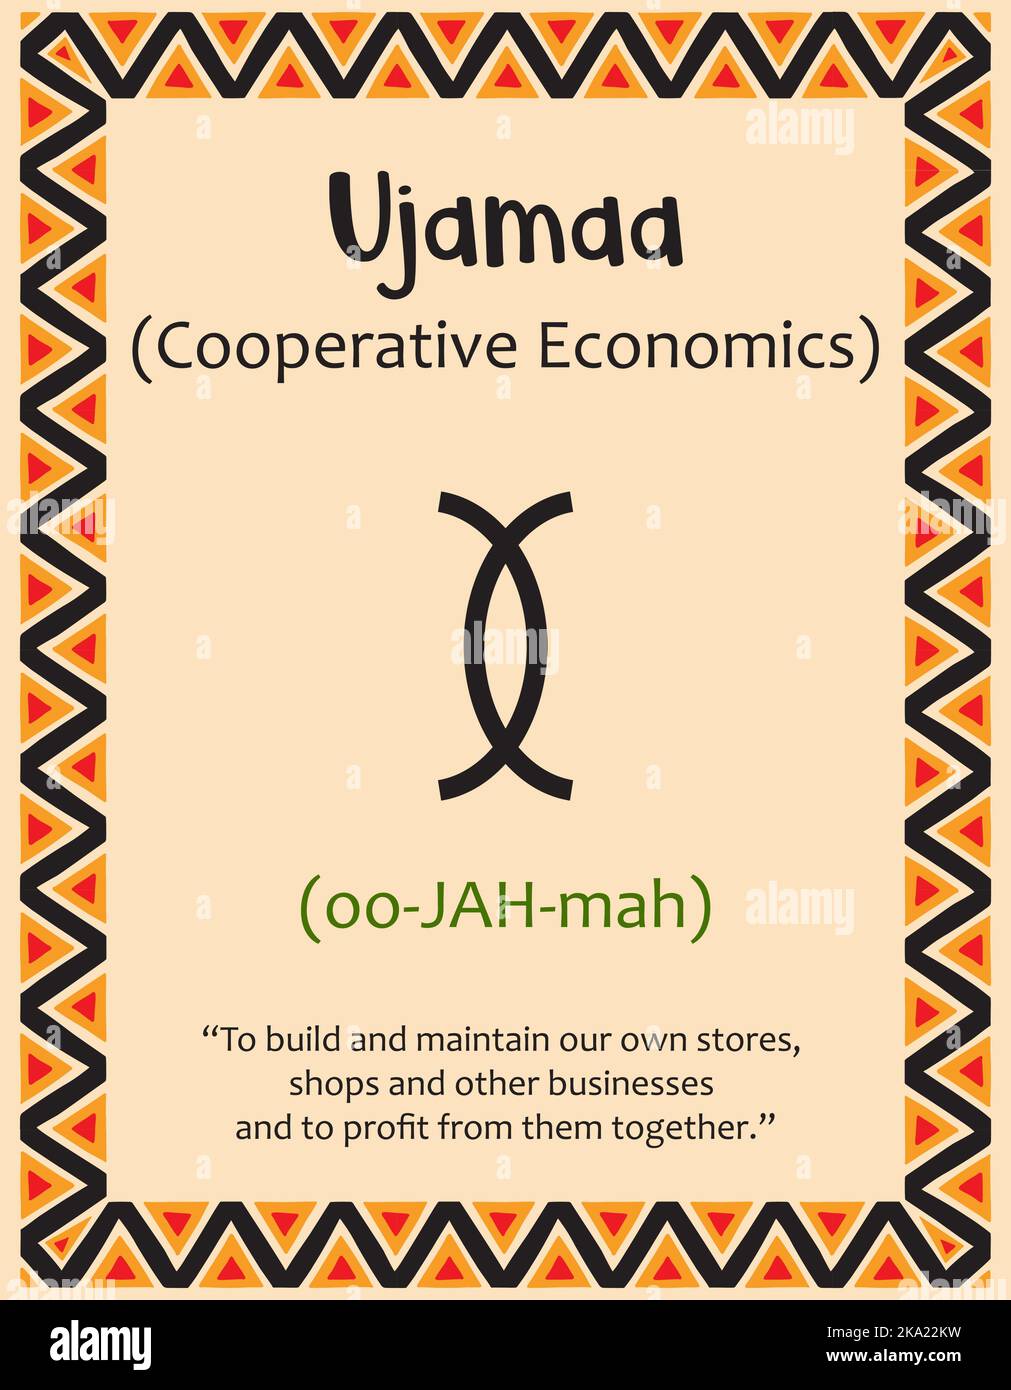 A card with one of the Kwanzaa principles. Symbol Ujamaa means Cooperative Economics in Swahili. Poster with sign and description. Ethnic African patt Stock Vector